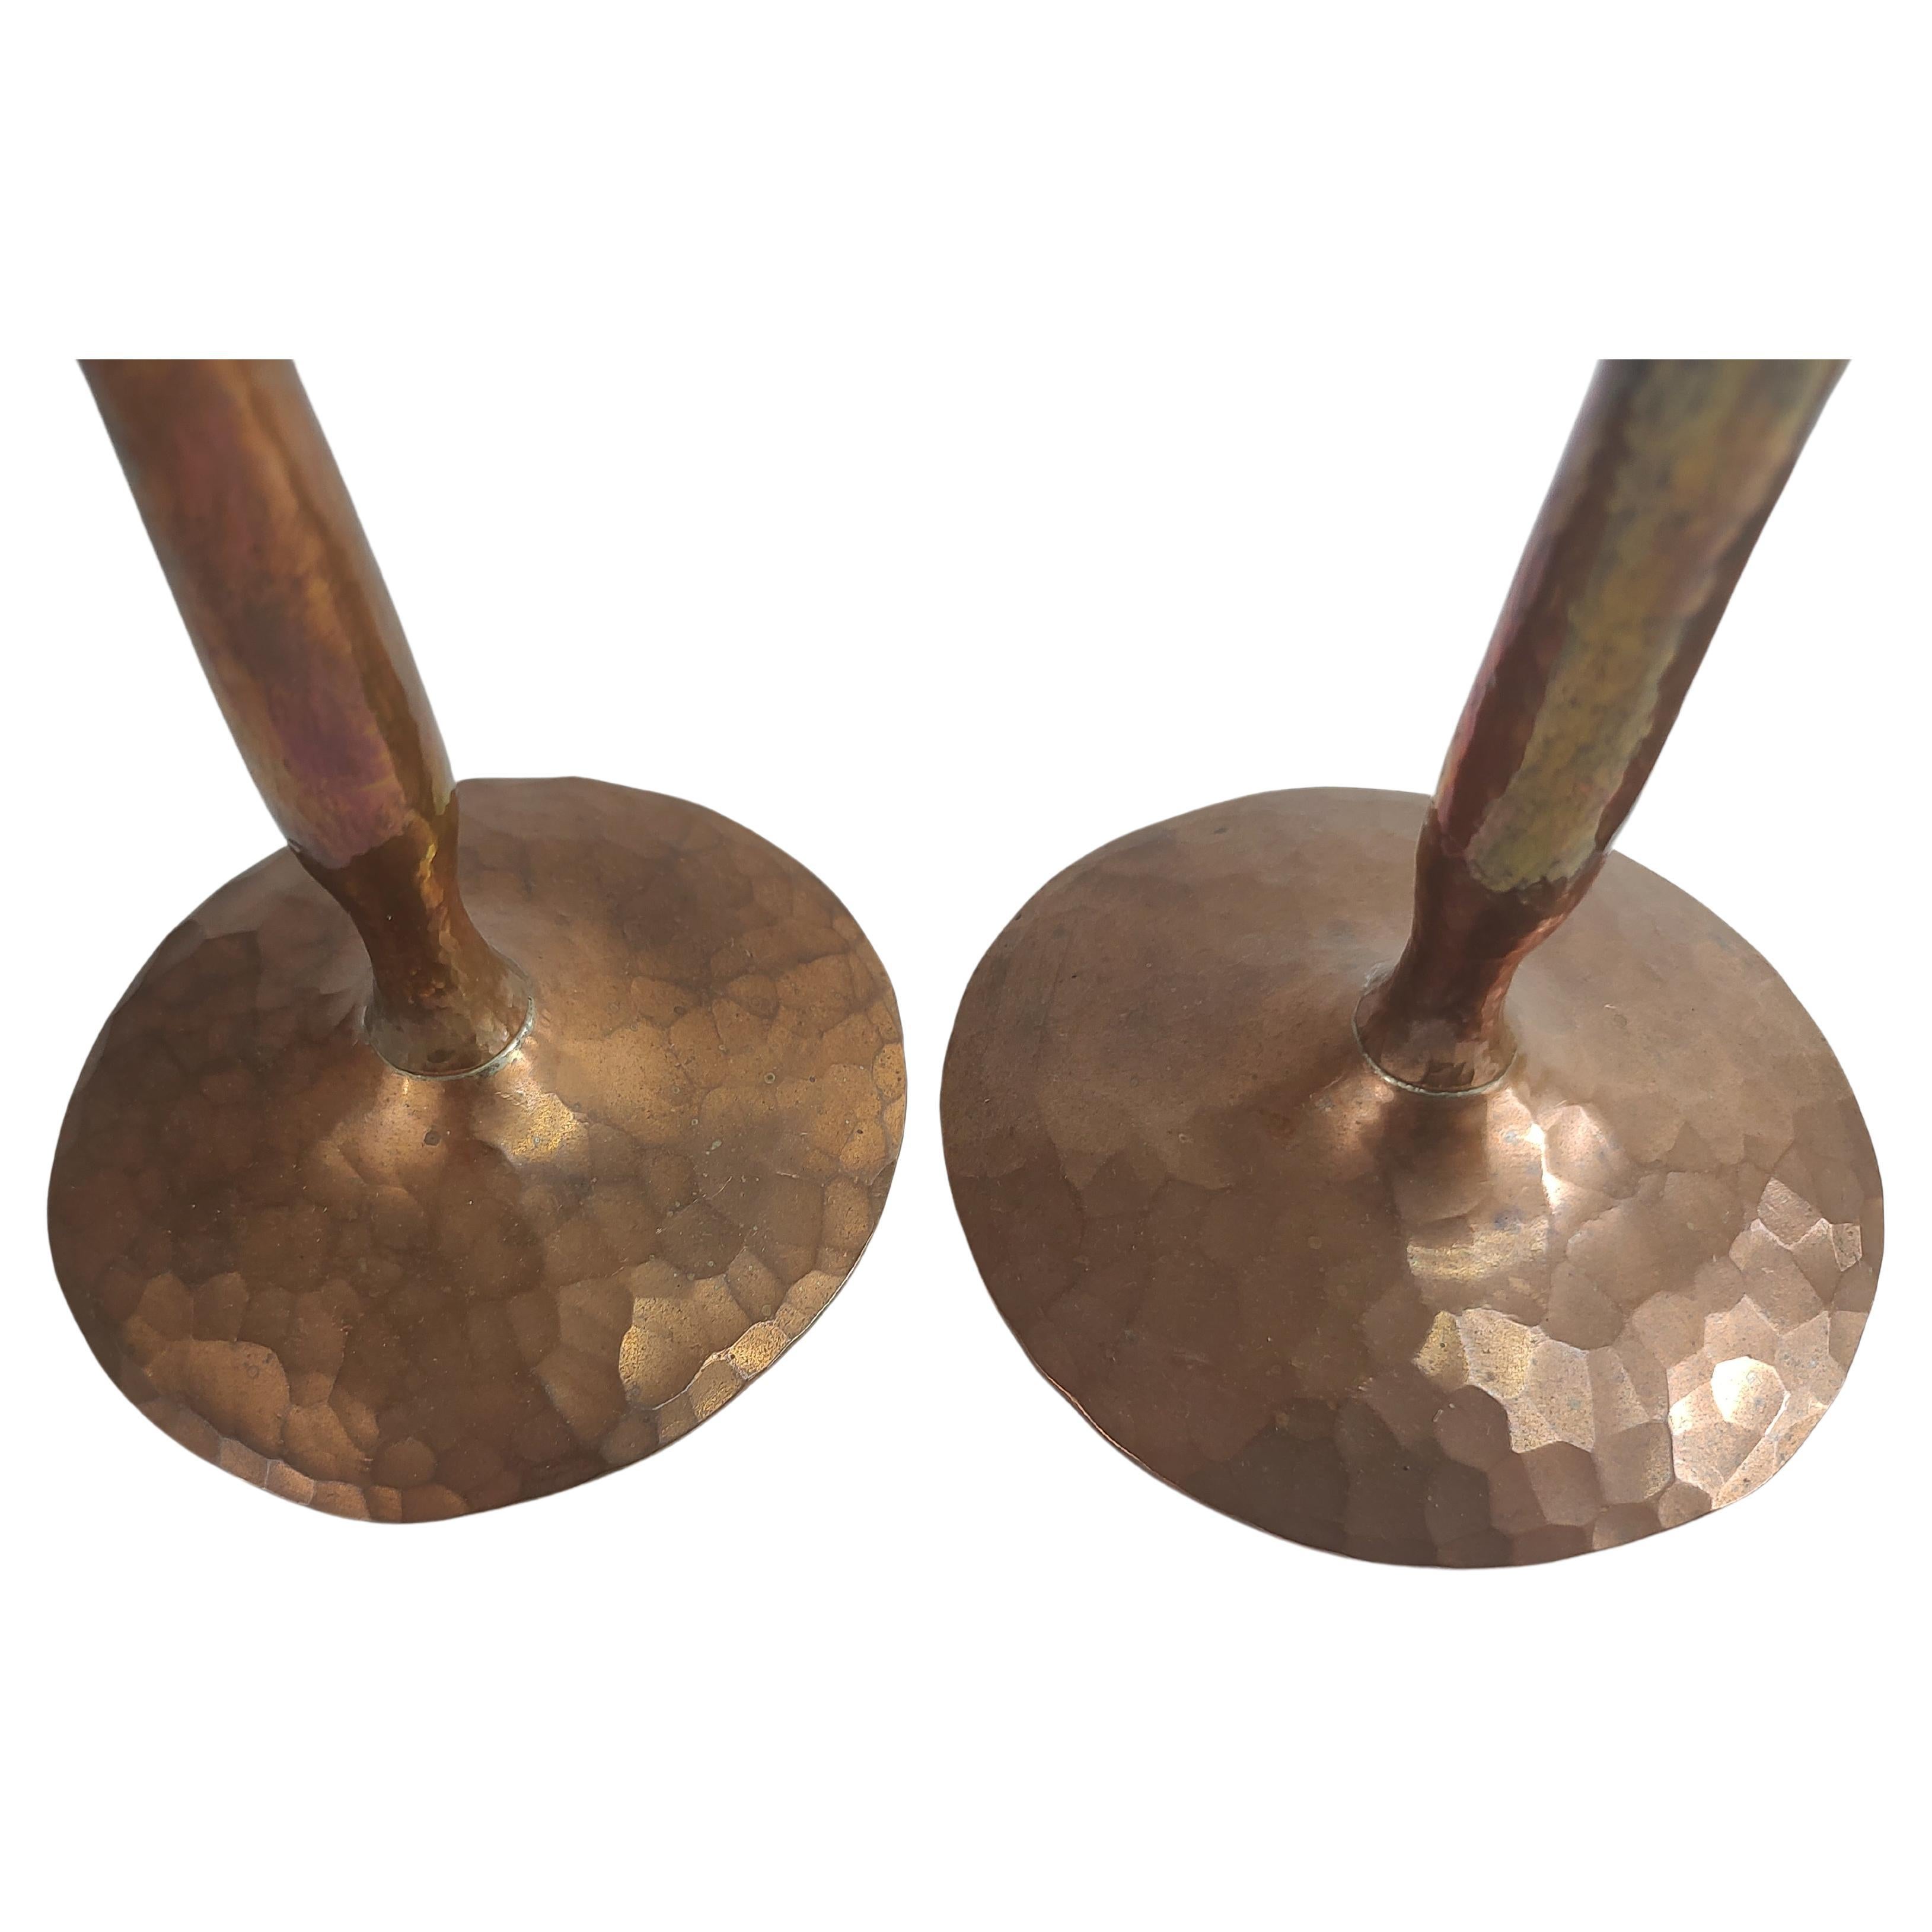 Hand Hammered & Polished Copper Candlesticks by Hessel Studios California  In Good Condition For Sale In Port Jervis, NY